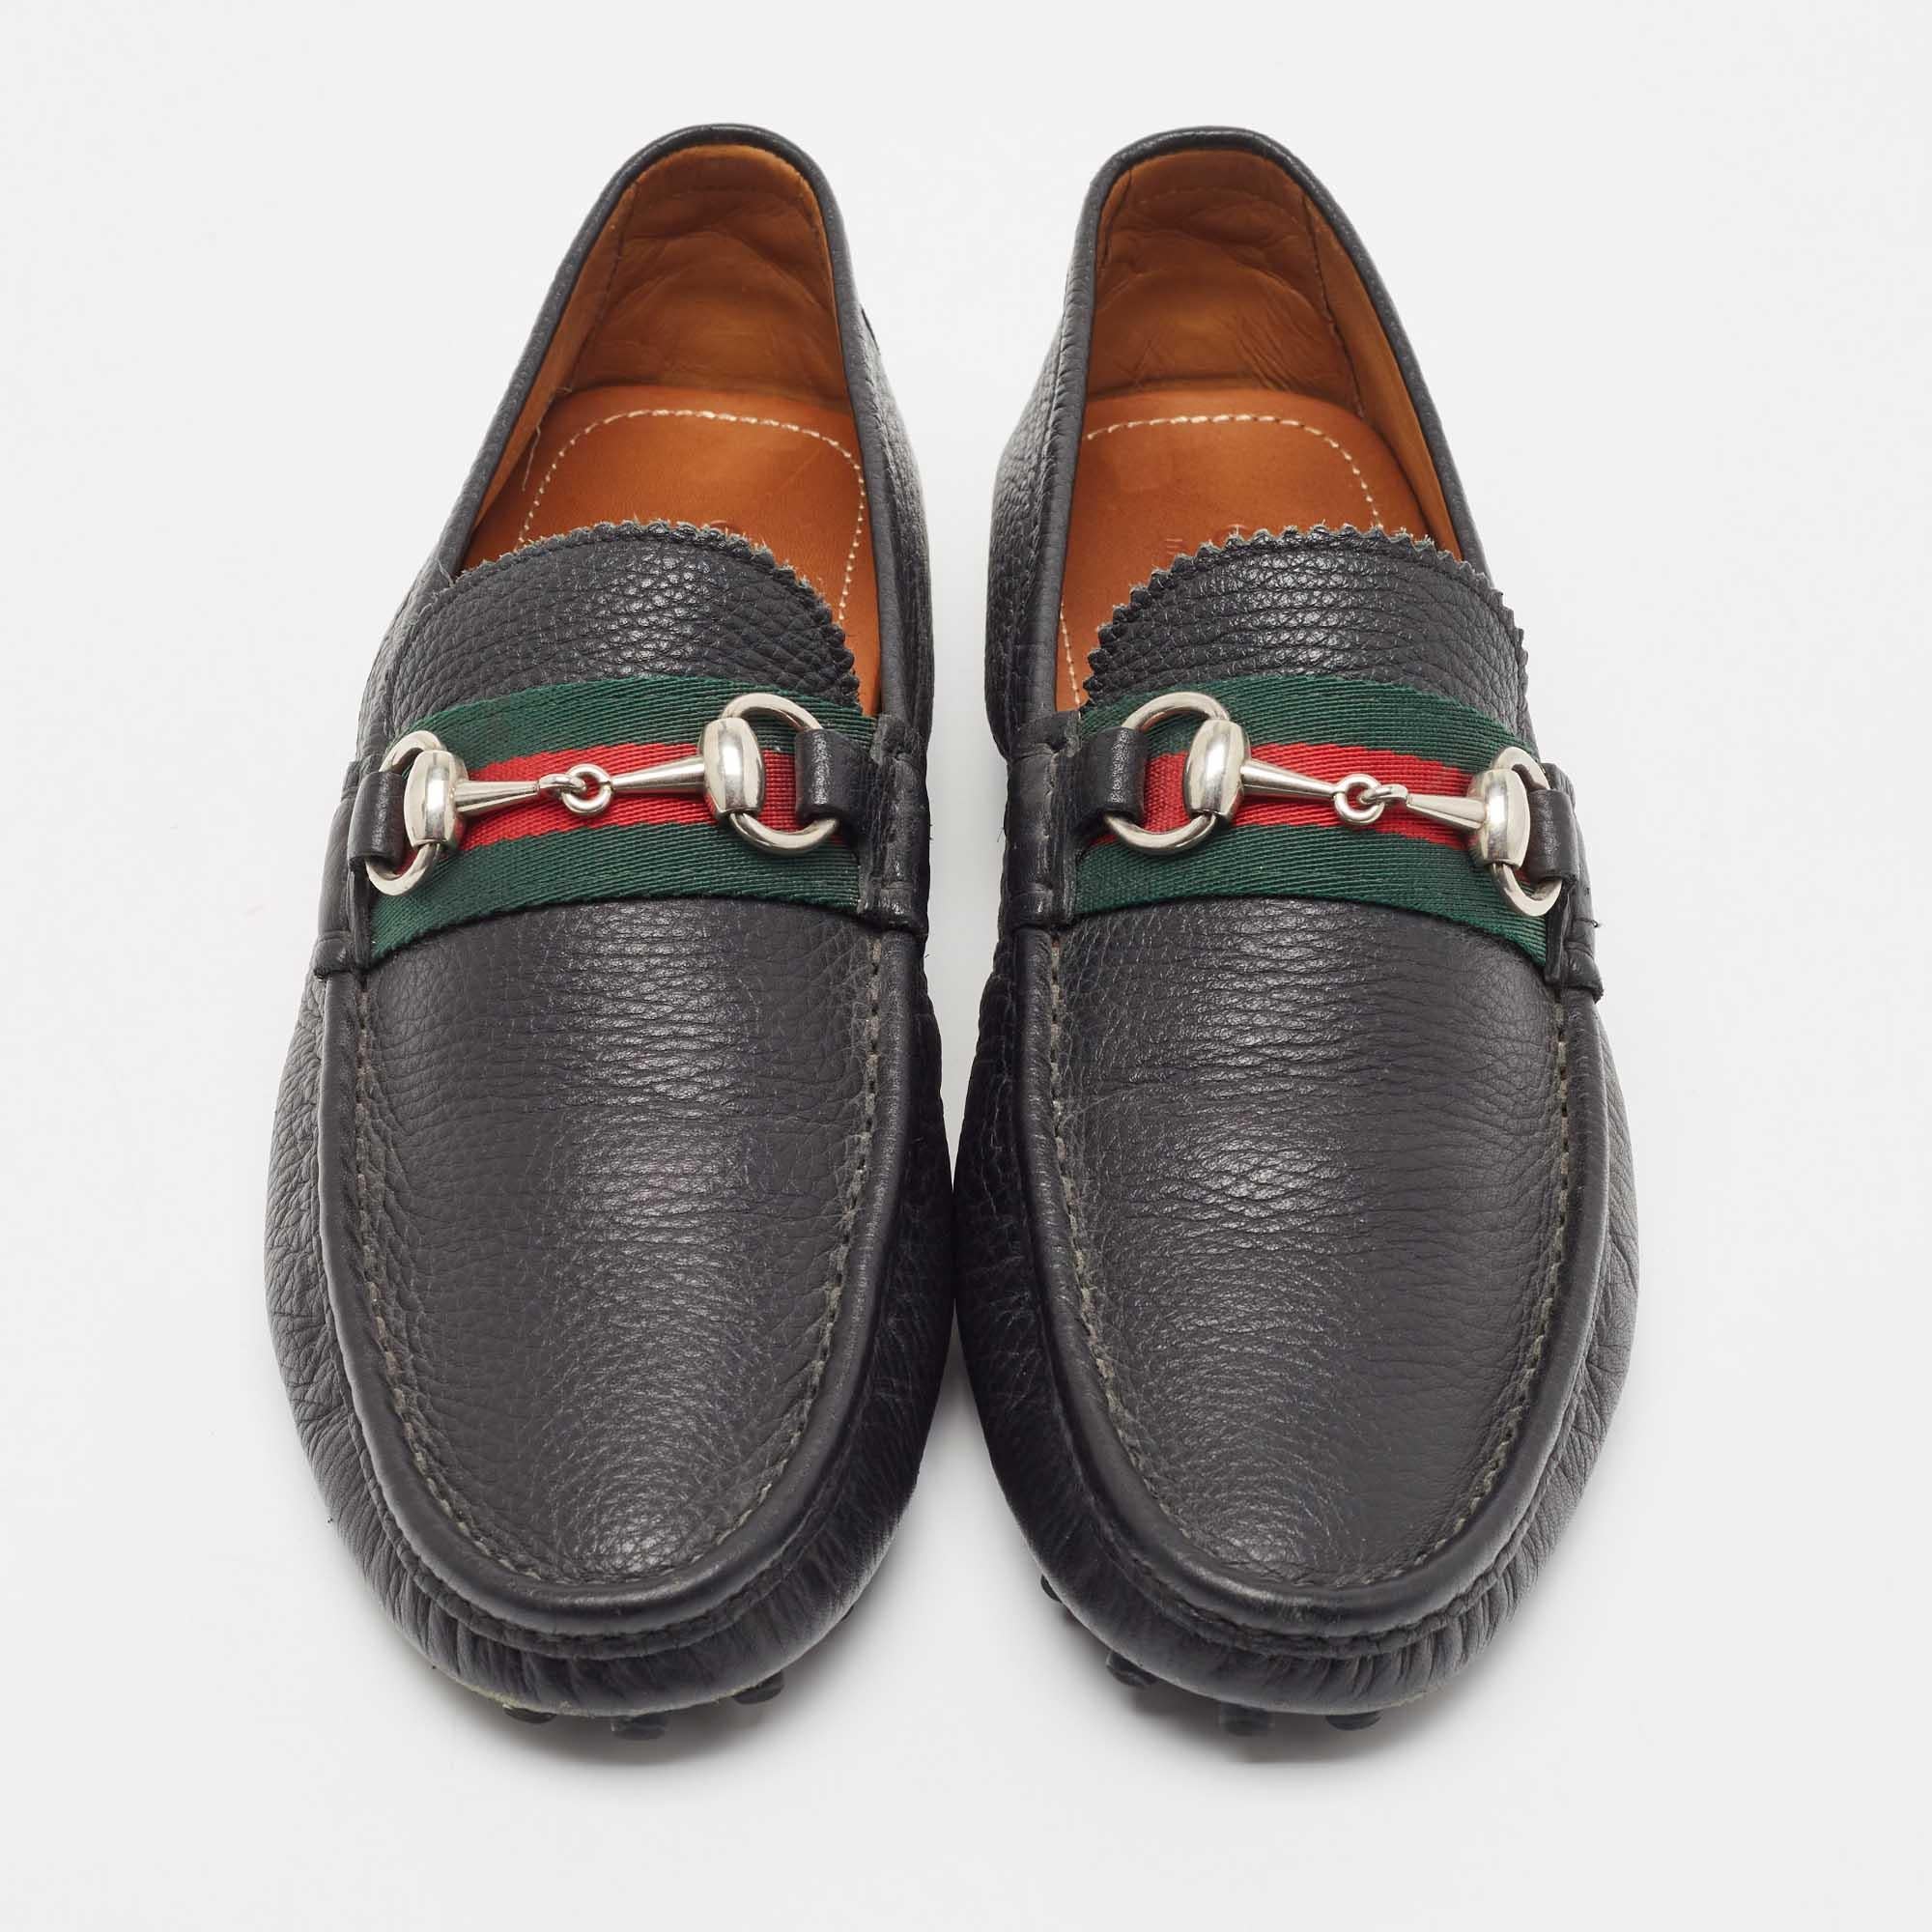 Complement your well-put-together outfit with these loafers by Gucci. Minimal and classy, they have an amazing construction for enduring quality and comfortable fit.

